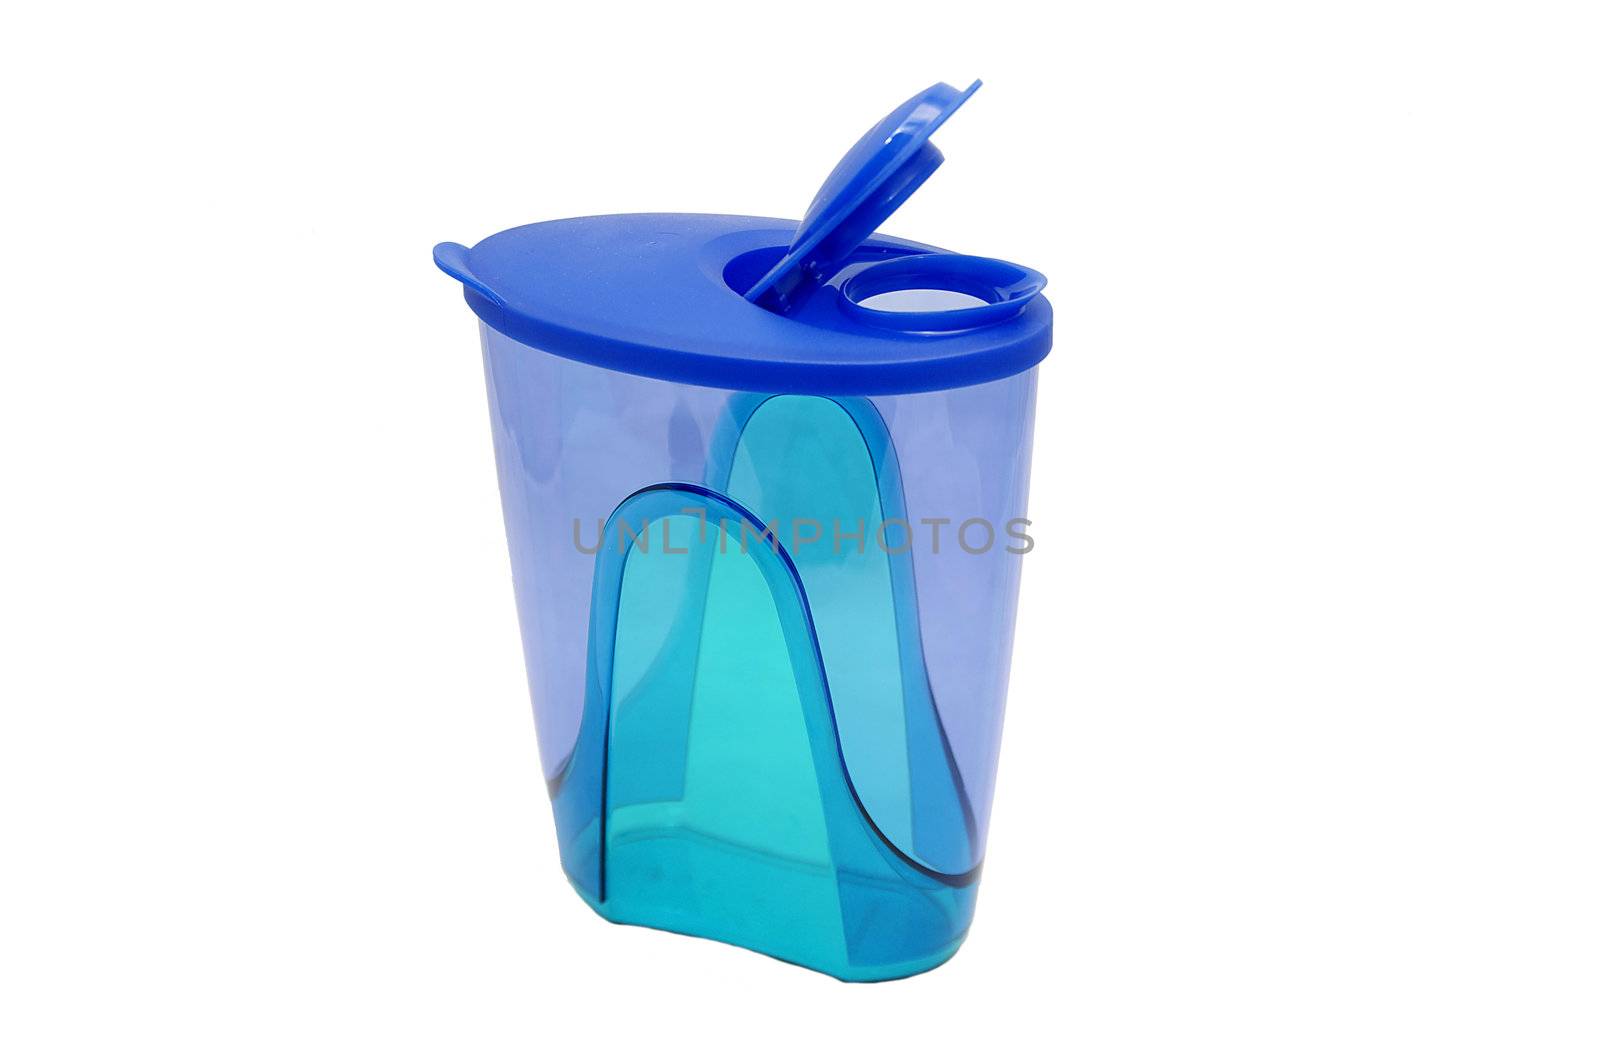 water filter blue on a white background